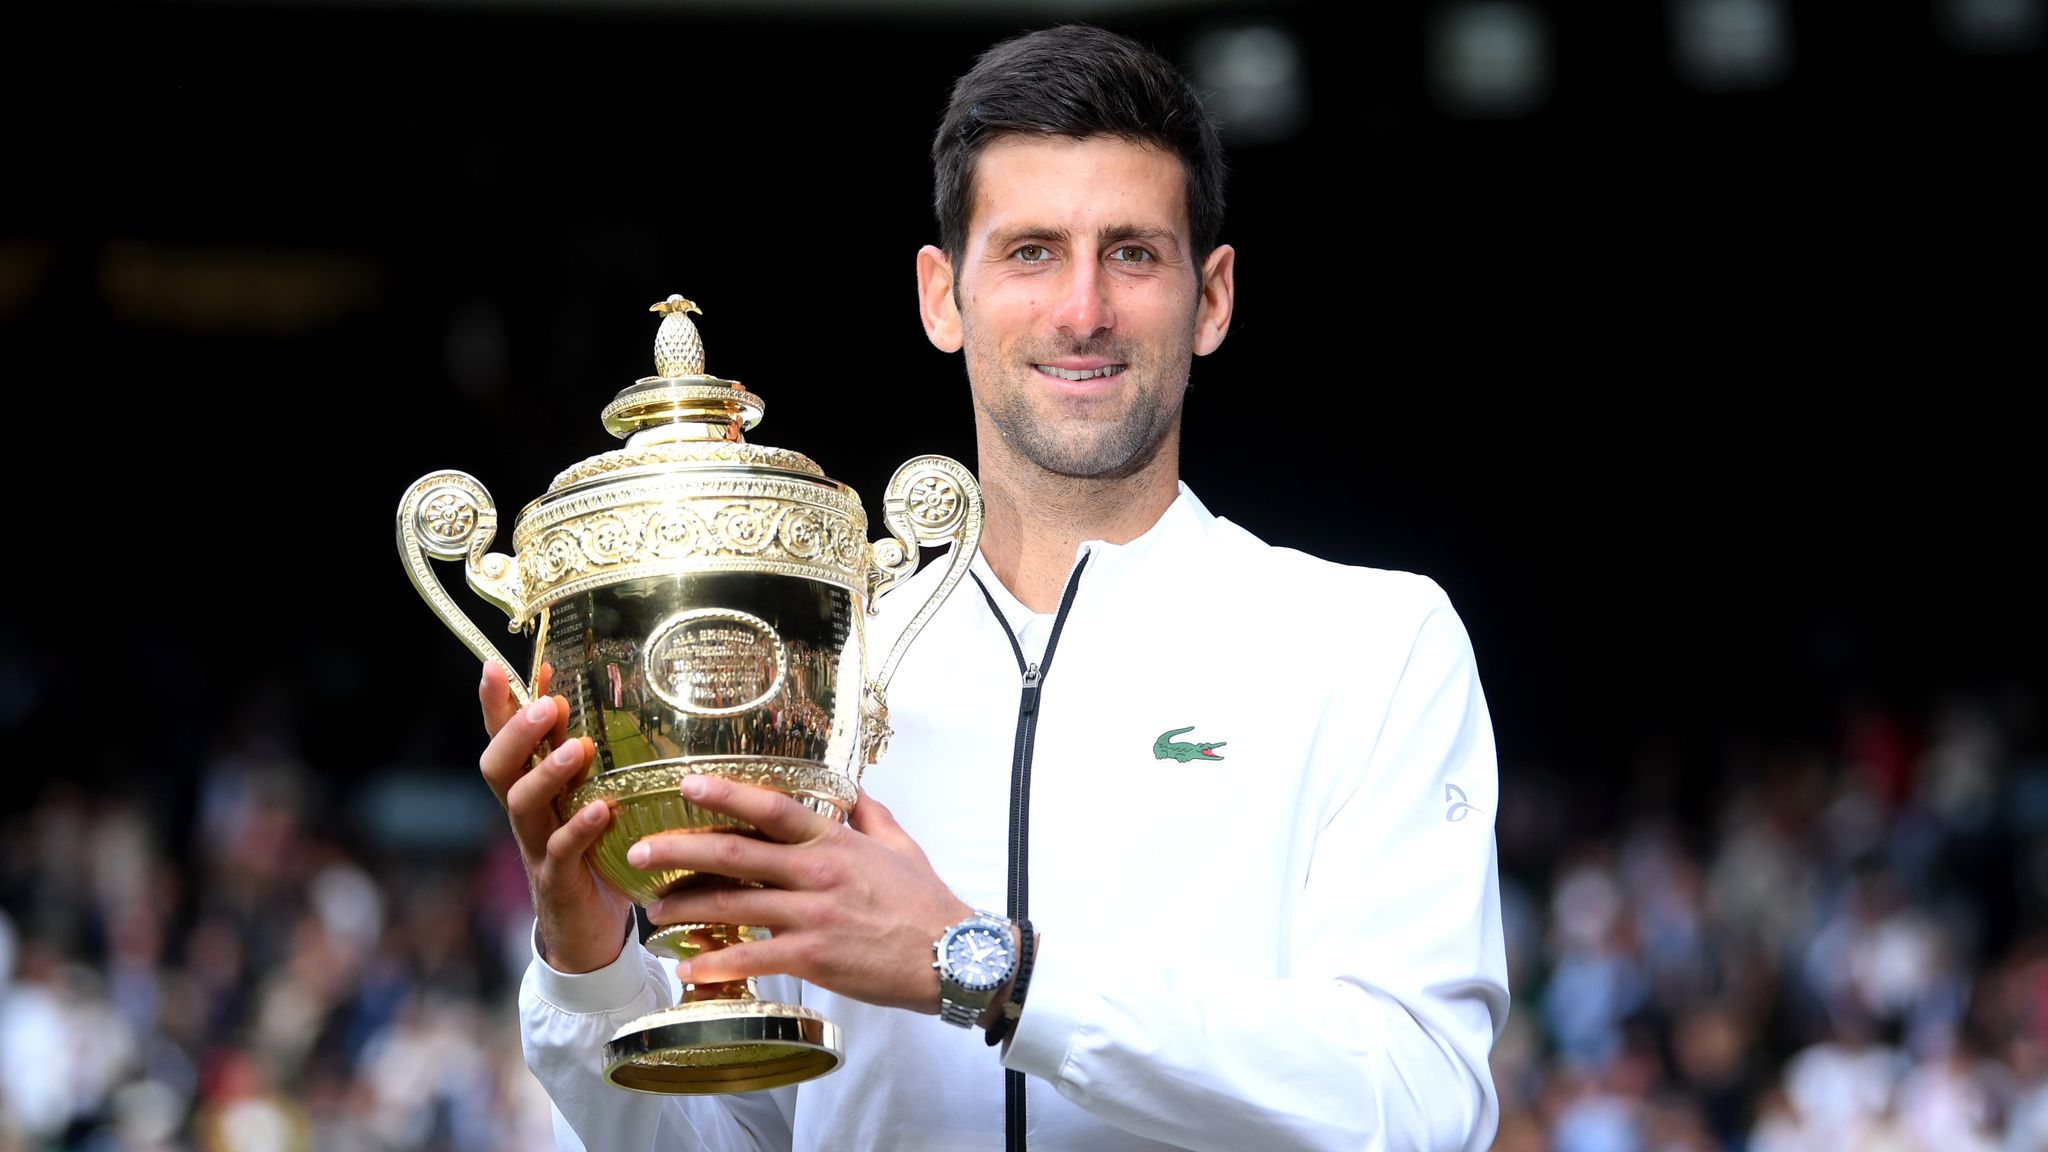 Wimbledon 2021 in pictures – a look at how different tournament is this  year